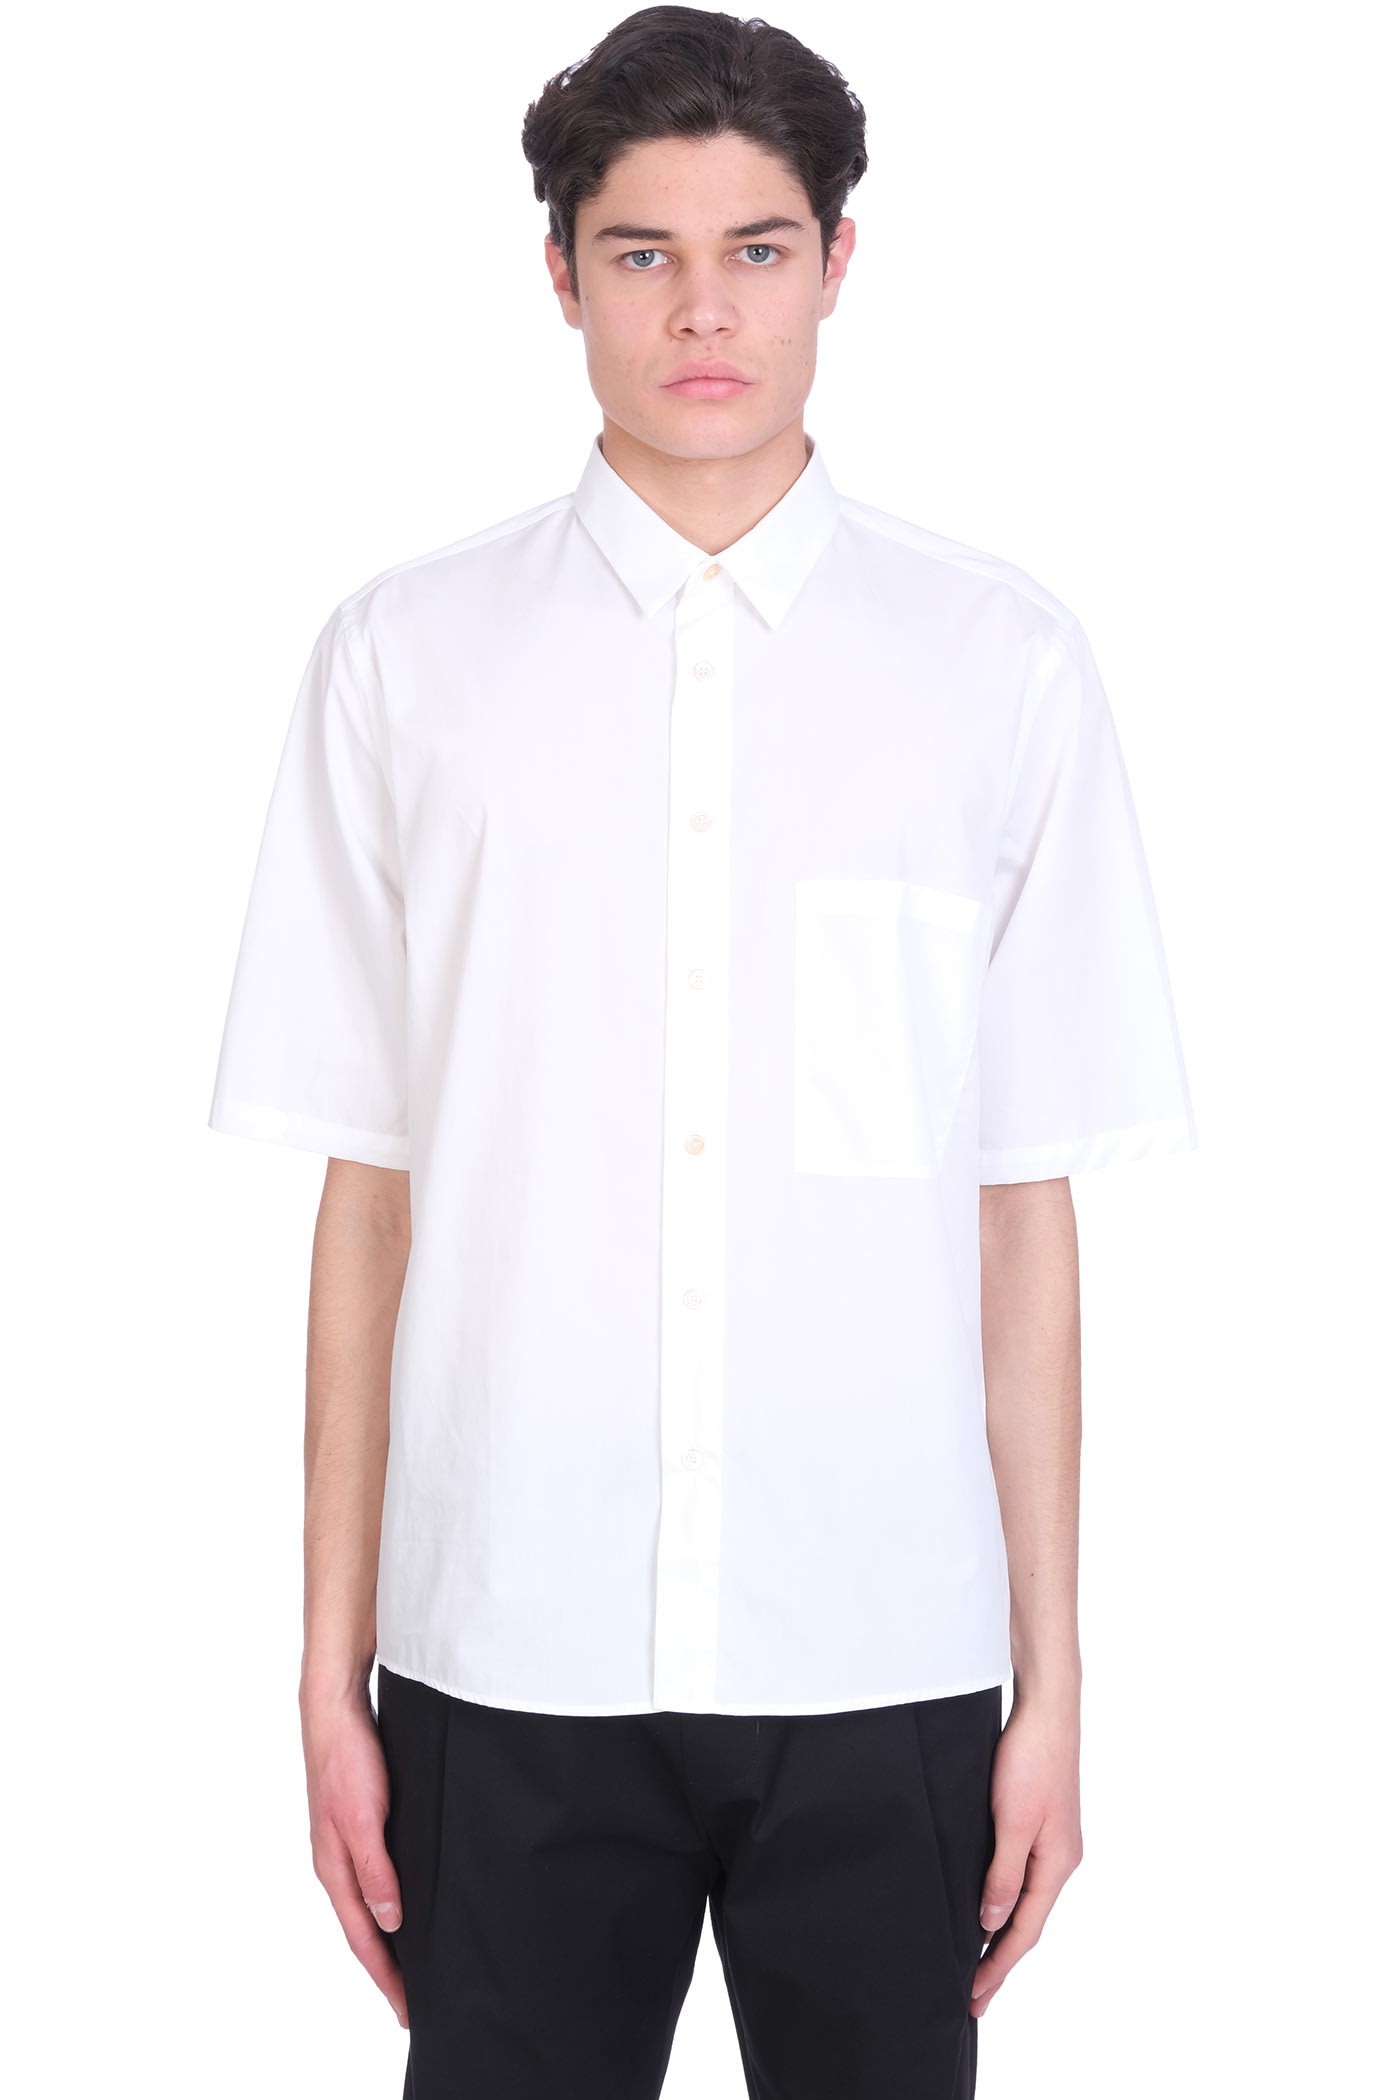 Low Brand Shirt In White Cotton